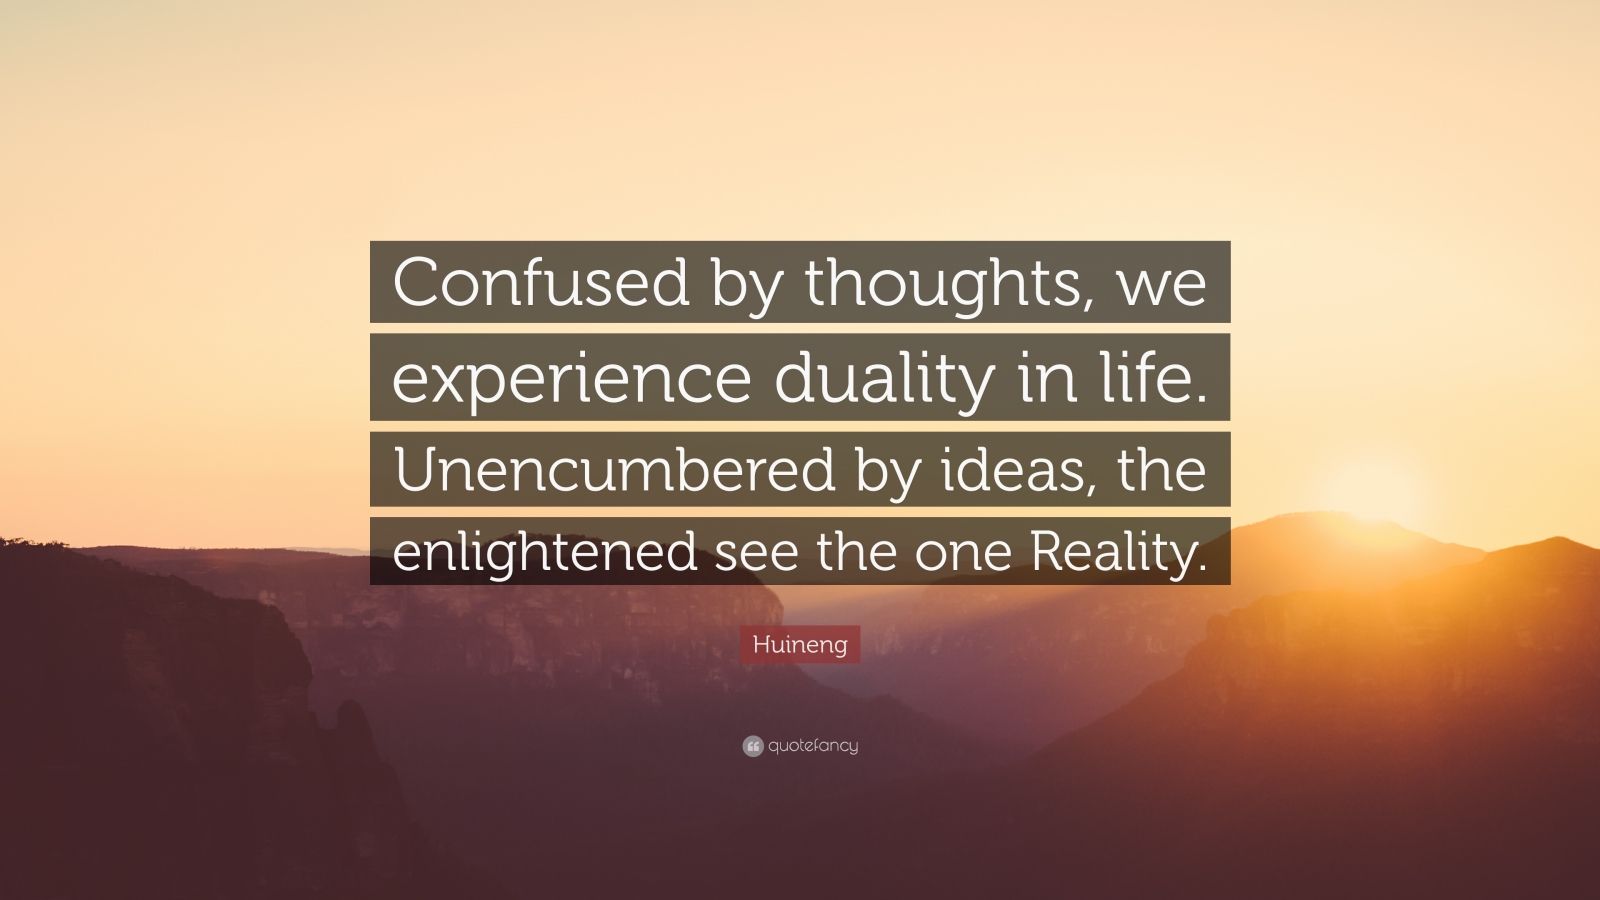 Huineng Quote: “Confused by thoughts, we experience duality in life ...